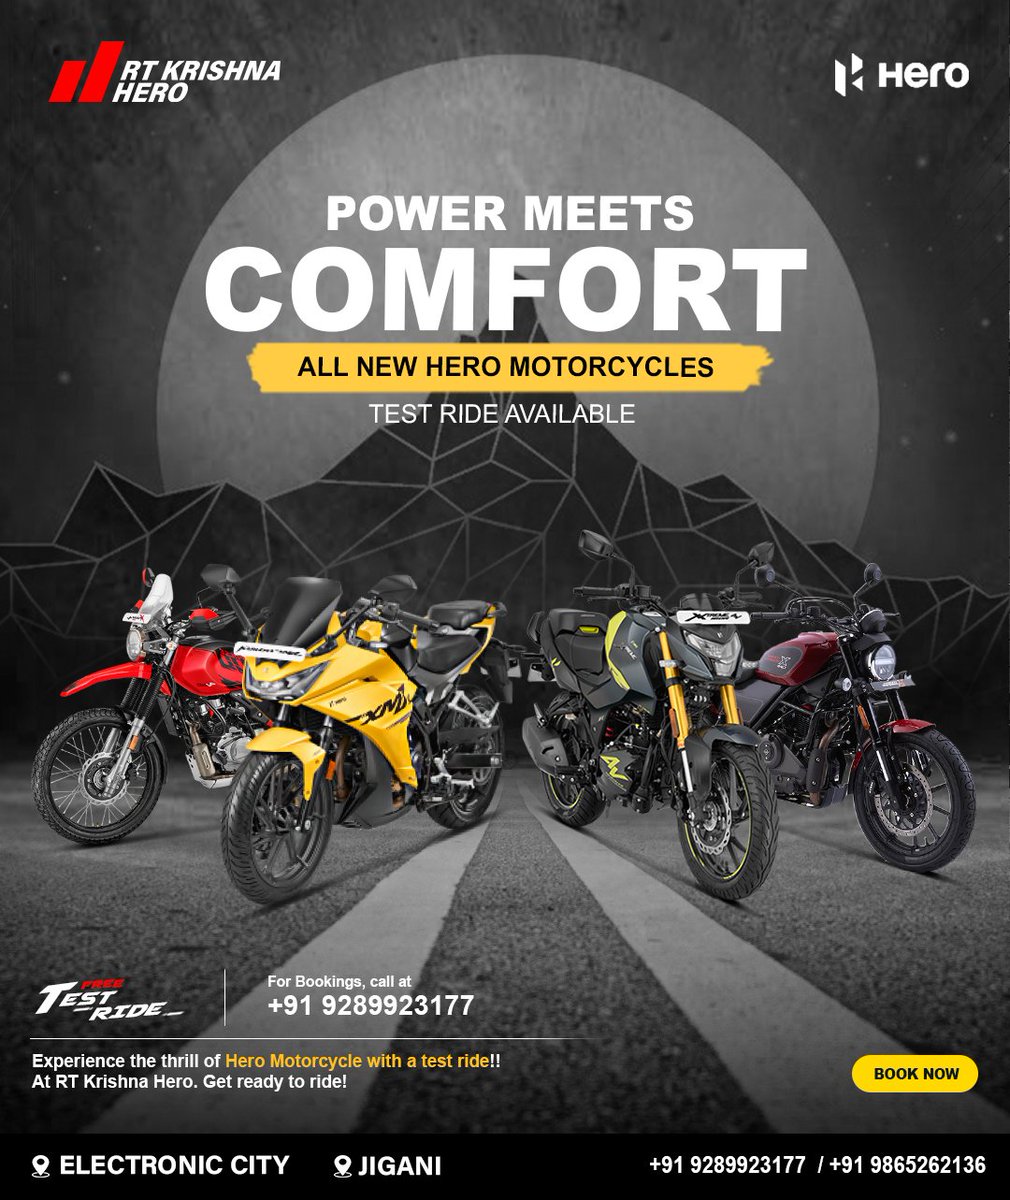 Discover unforgettable moments where power meets comfort. Test ride the latest Hero motorcycle at RT Krishna Hero. Call us at 9289923177 | 9865262136 for a test ride.
.
.
#RTKrishnaHero #heromotocorp #EasyBooking #bangalore #KarizmaXMR #xpulse200 #xtreme160r4v #harleydavidson